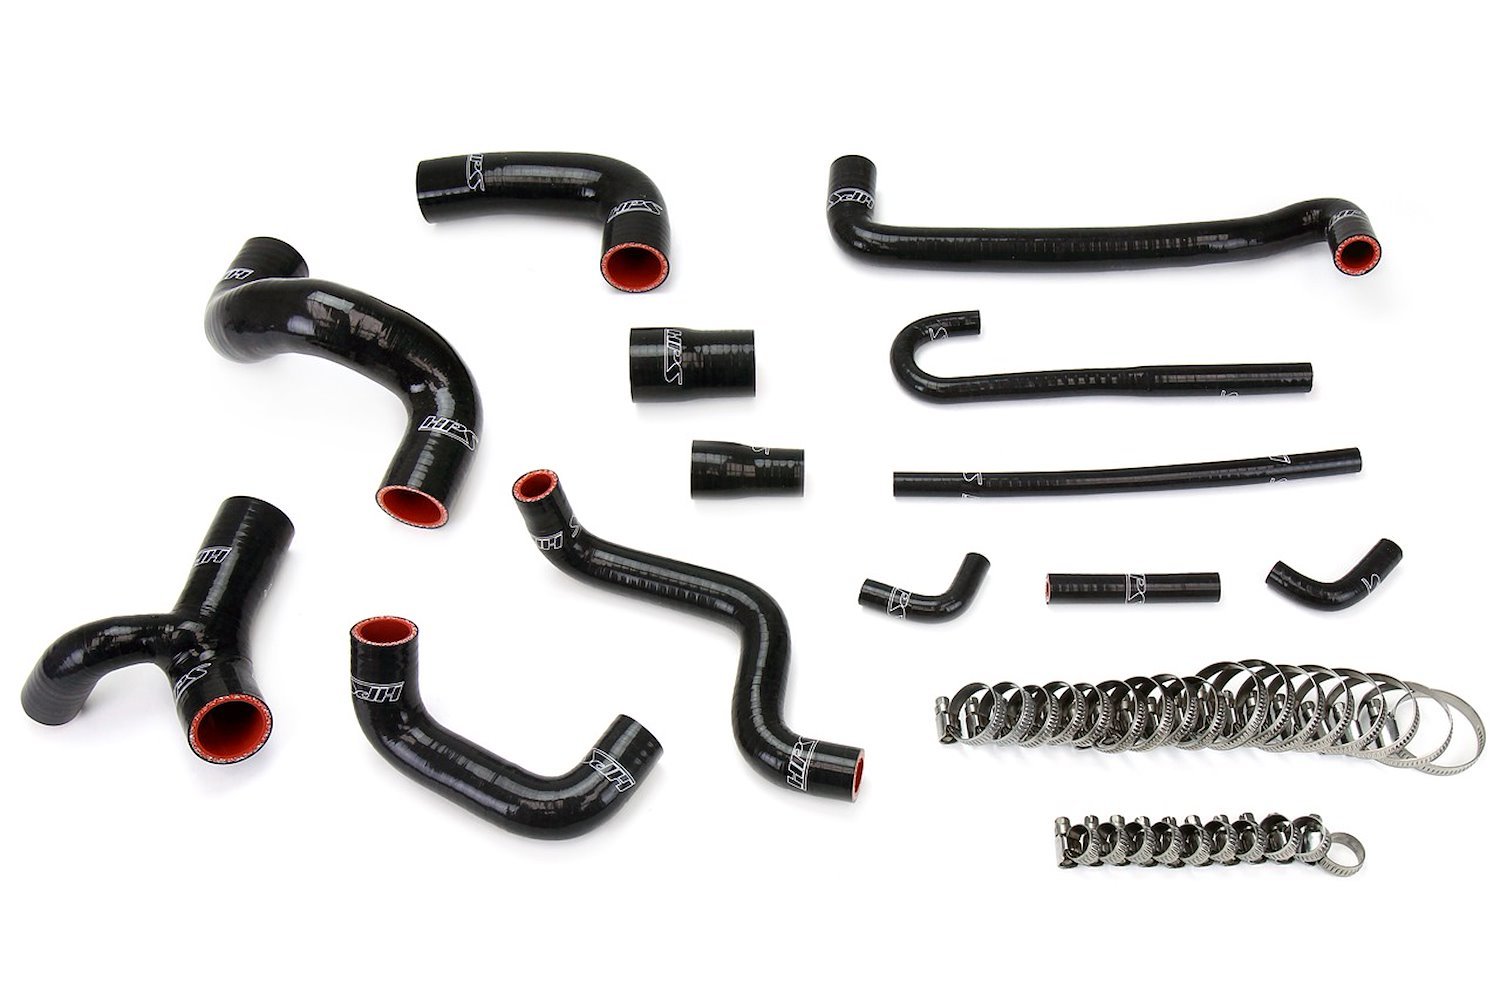 57-1209-BLK Coolant Hose Kit, High-Temp 3-Ply Reinforced Silicone, Replace Rubber Radiator Heater Coolant Hoses